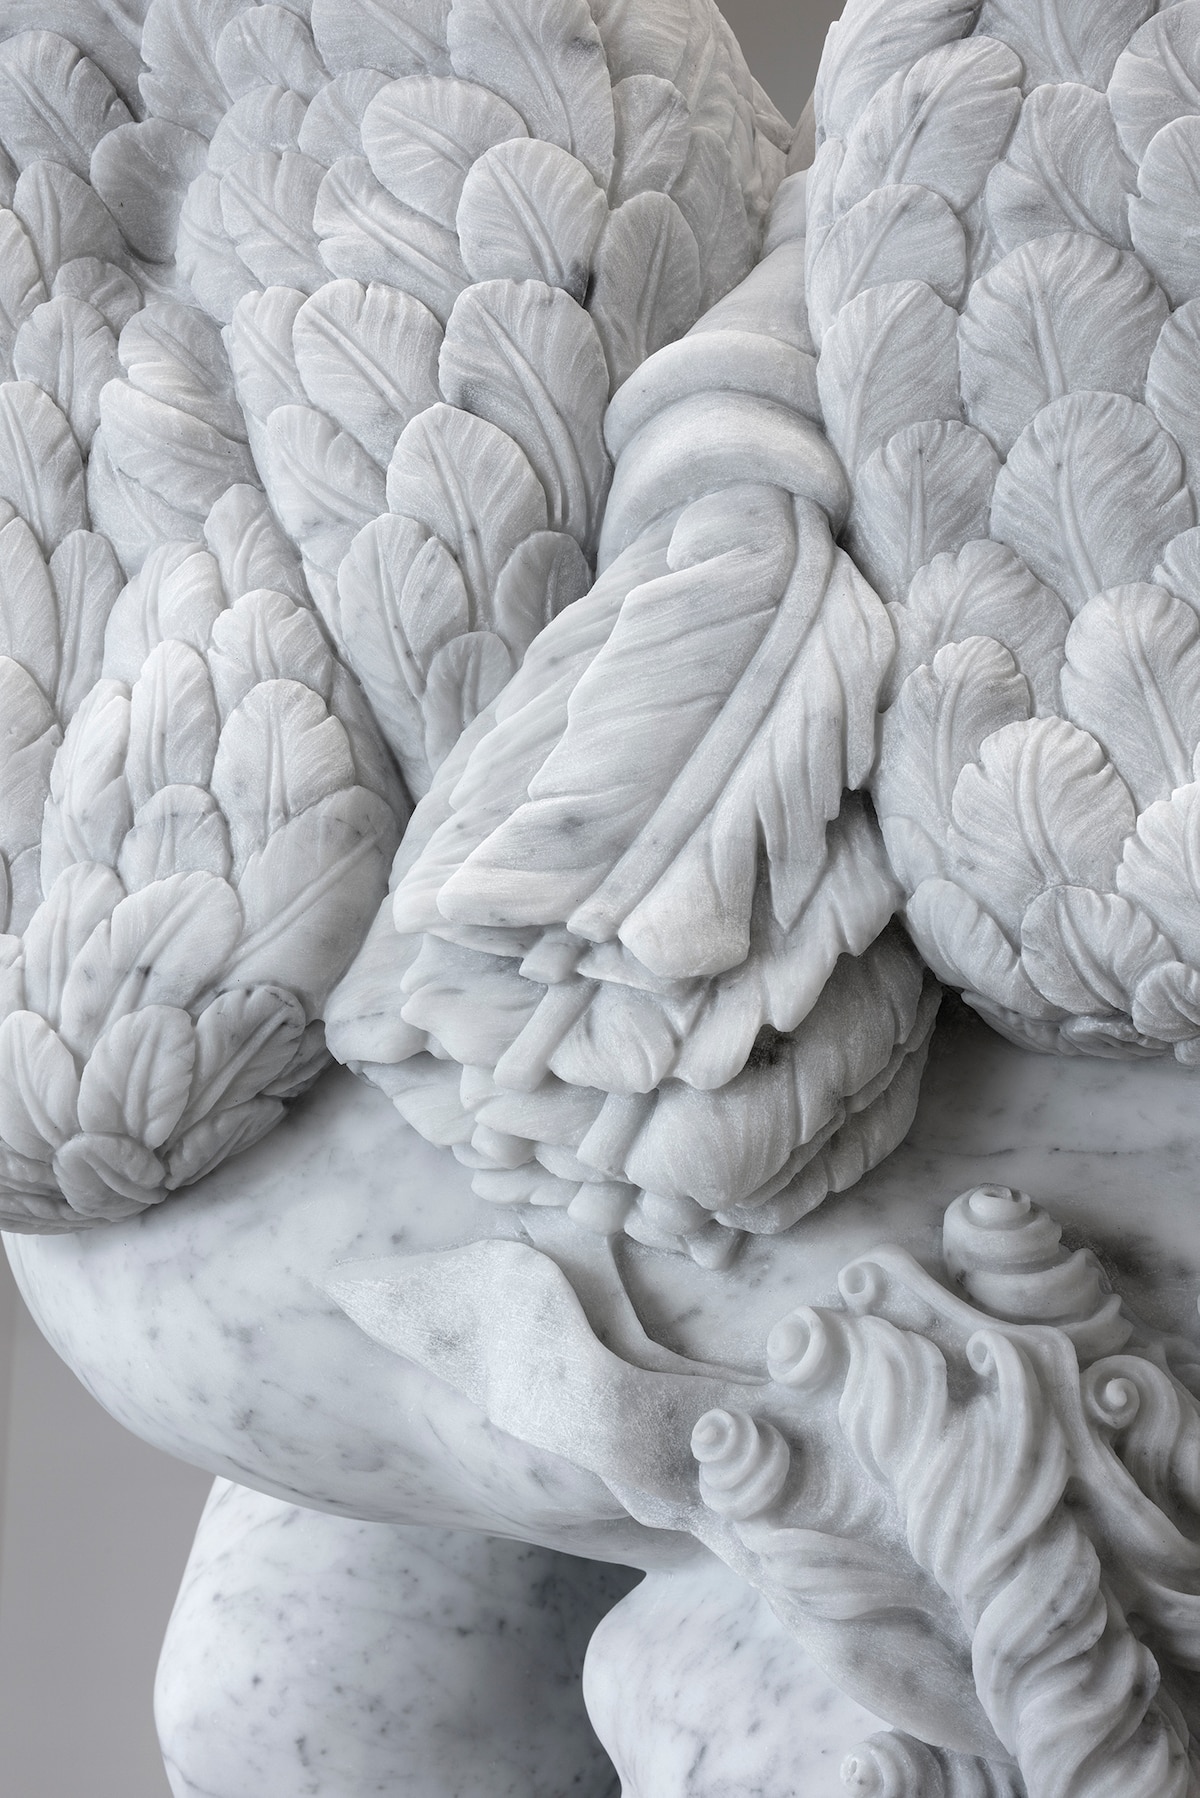 Artist Adam Parker Smith Compresses Classical Sculptures Into Small Marble Cubes (13)